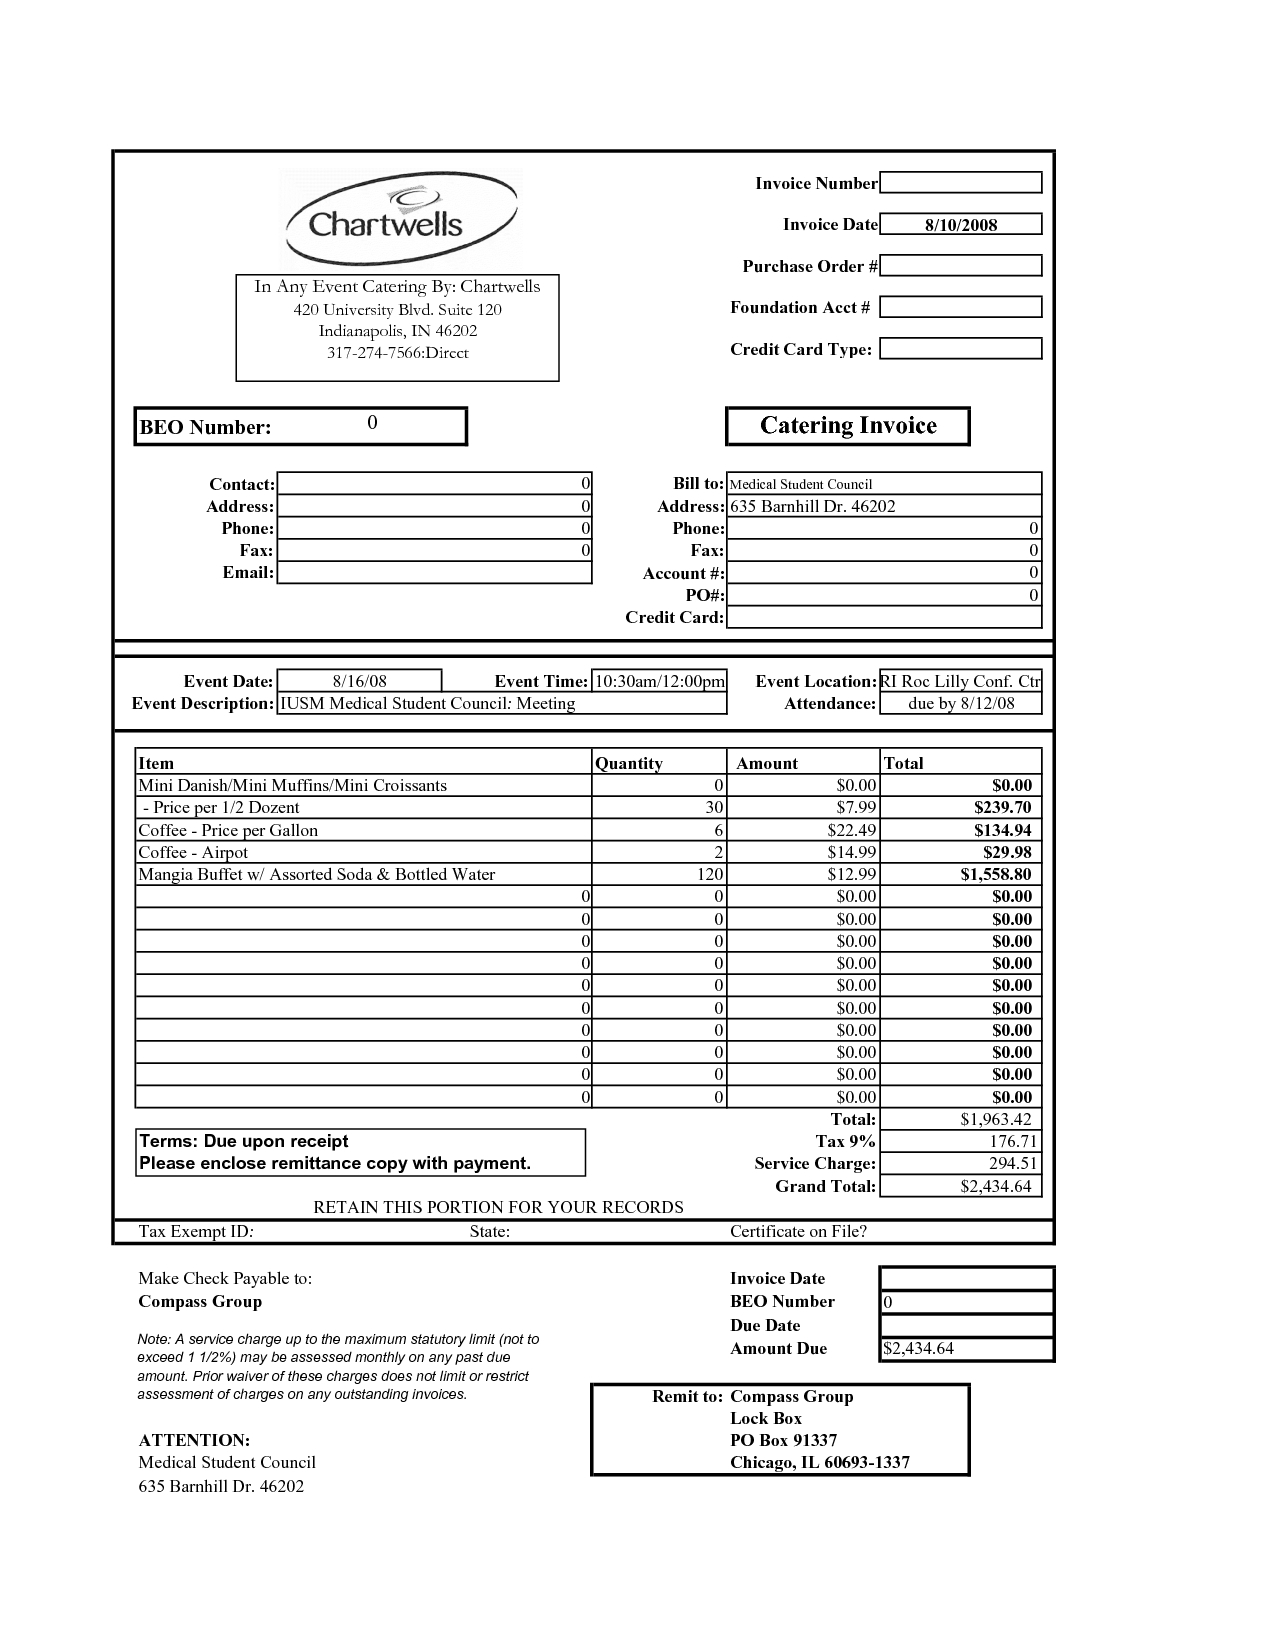 catering invoice sample firmsinja catering invoice template free